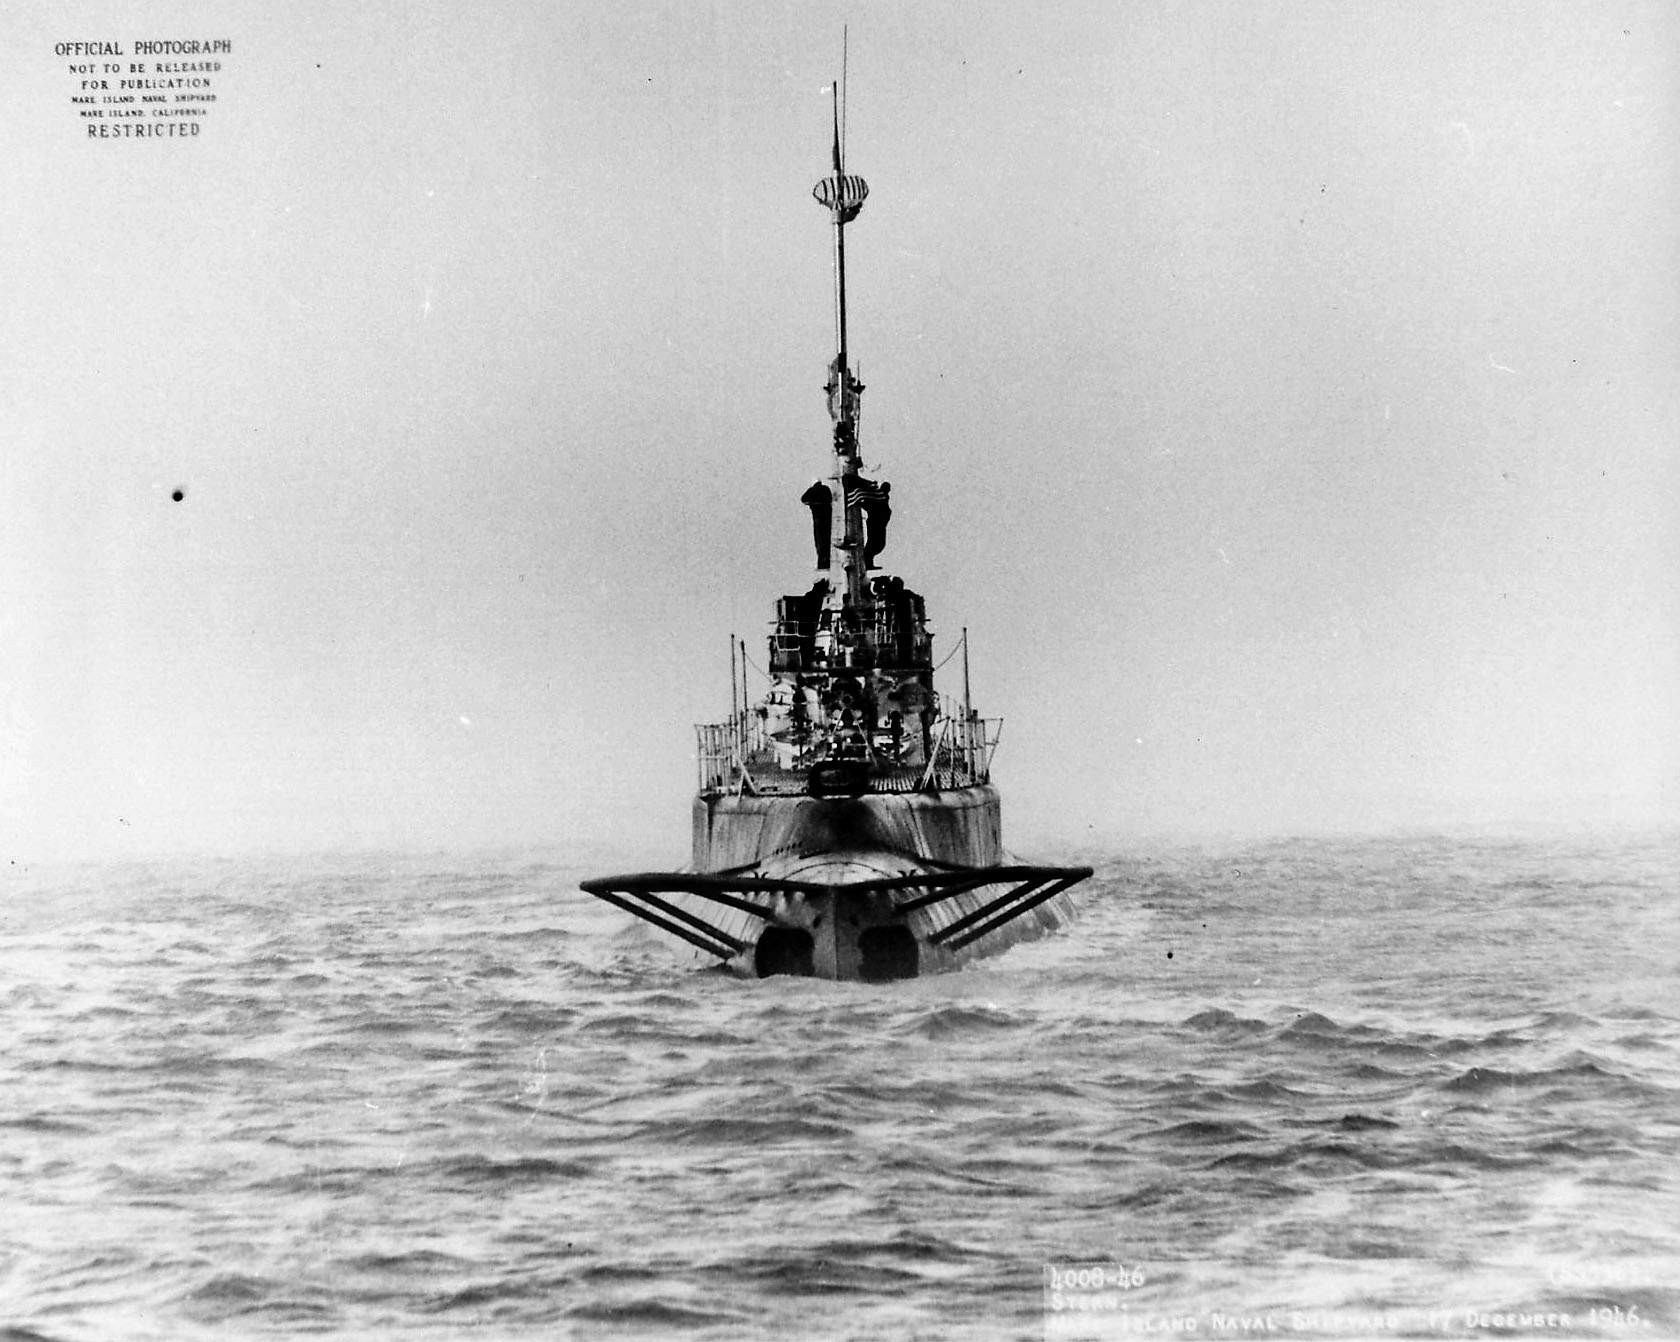 Stern view of USS Capitaine off Mare Island Navy Yard, Vallejo, California, United States, 17 Dec 1946